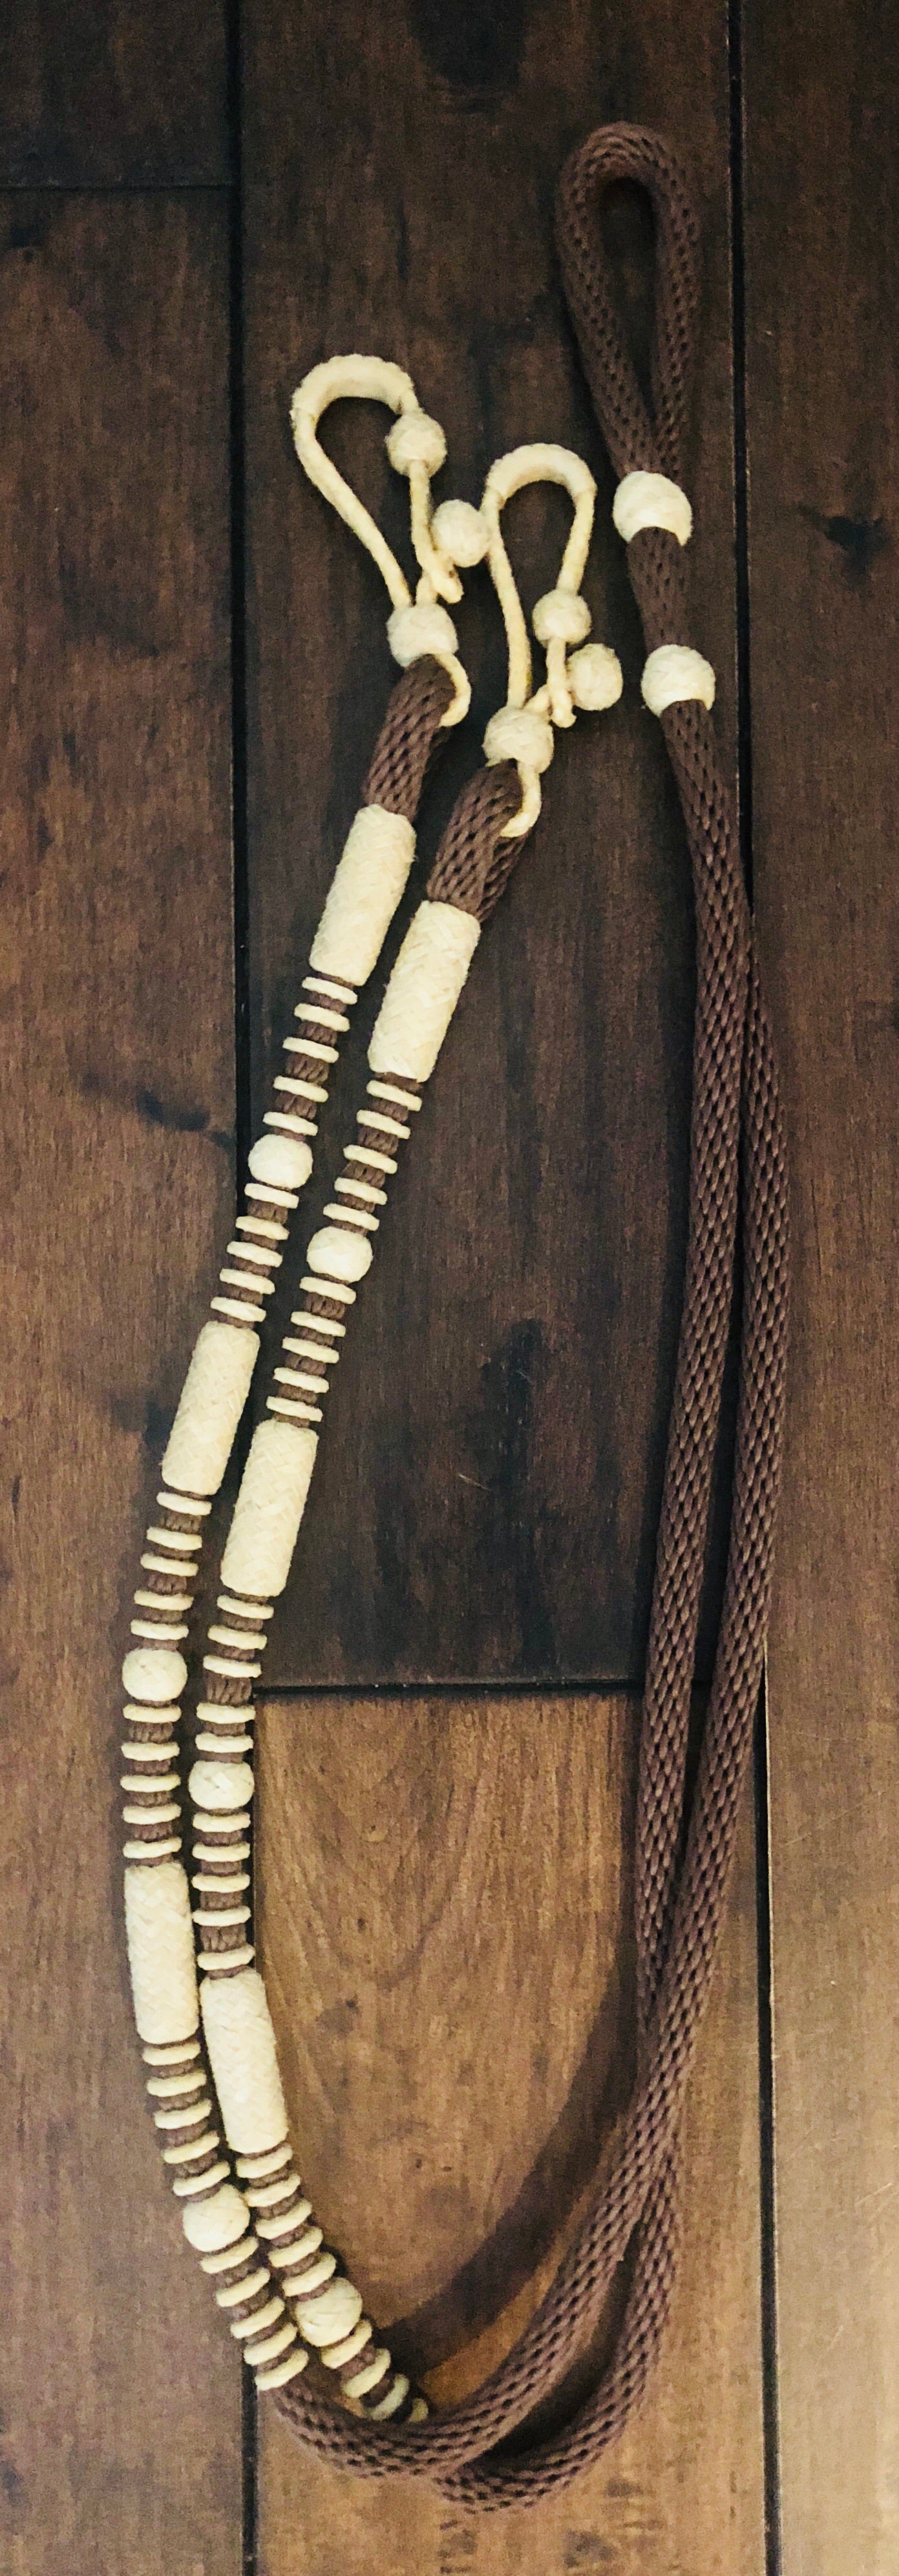 Roping/ Barrel Rein w/Rawhide Buttons Braided by Ben Seville (Brown)